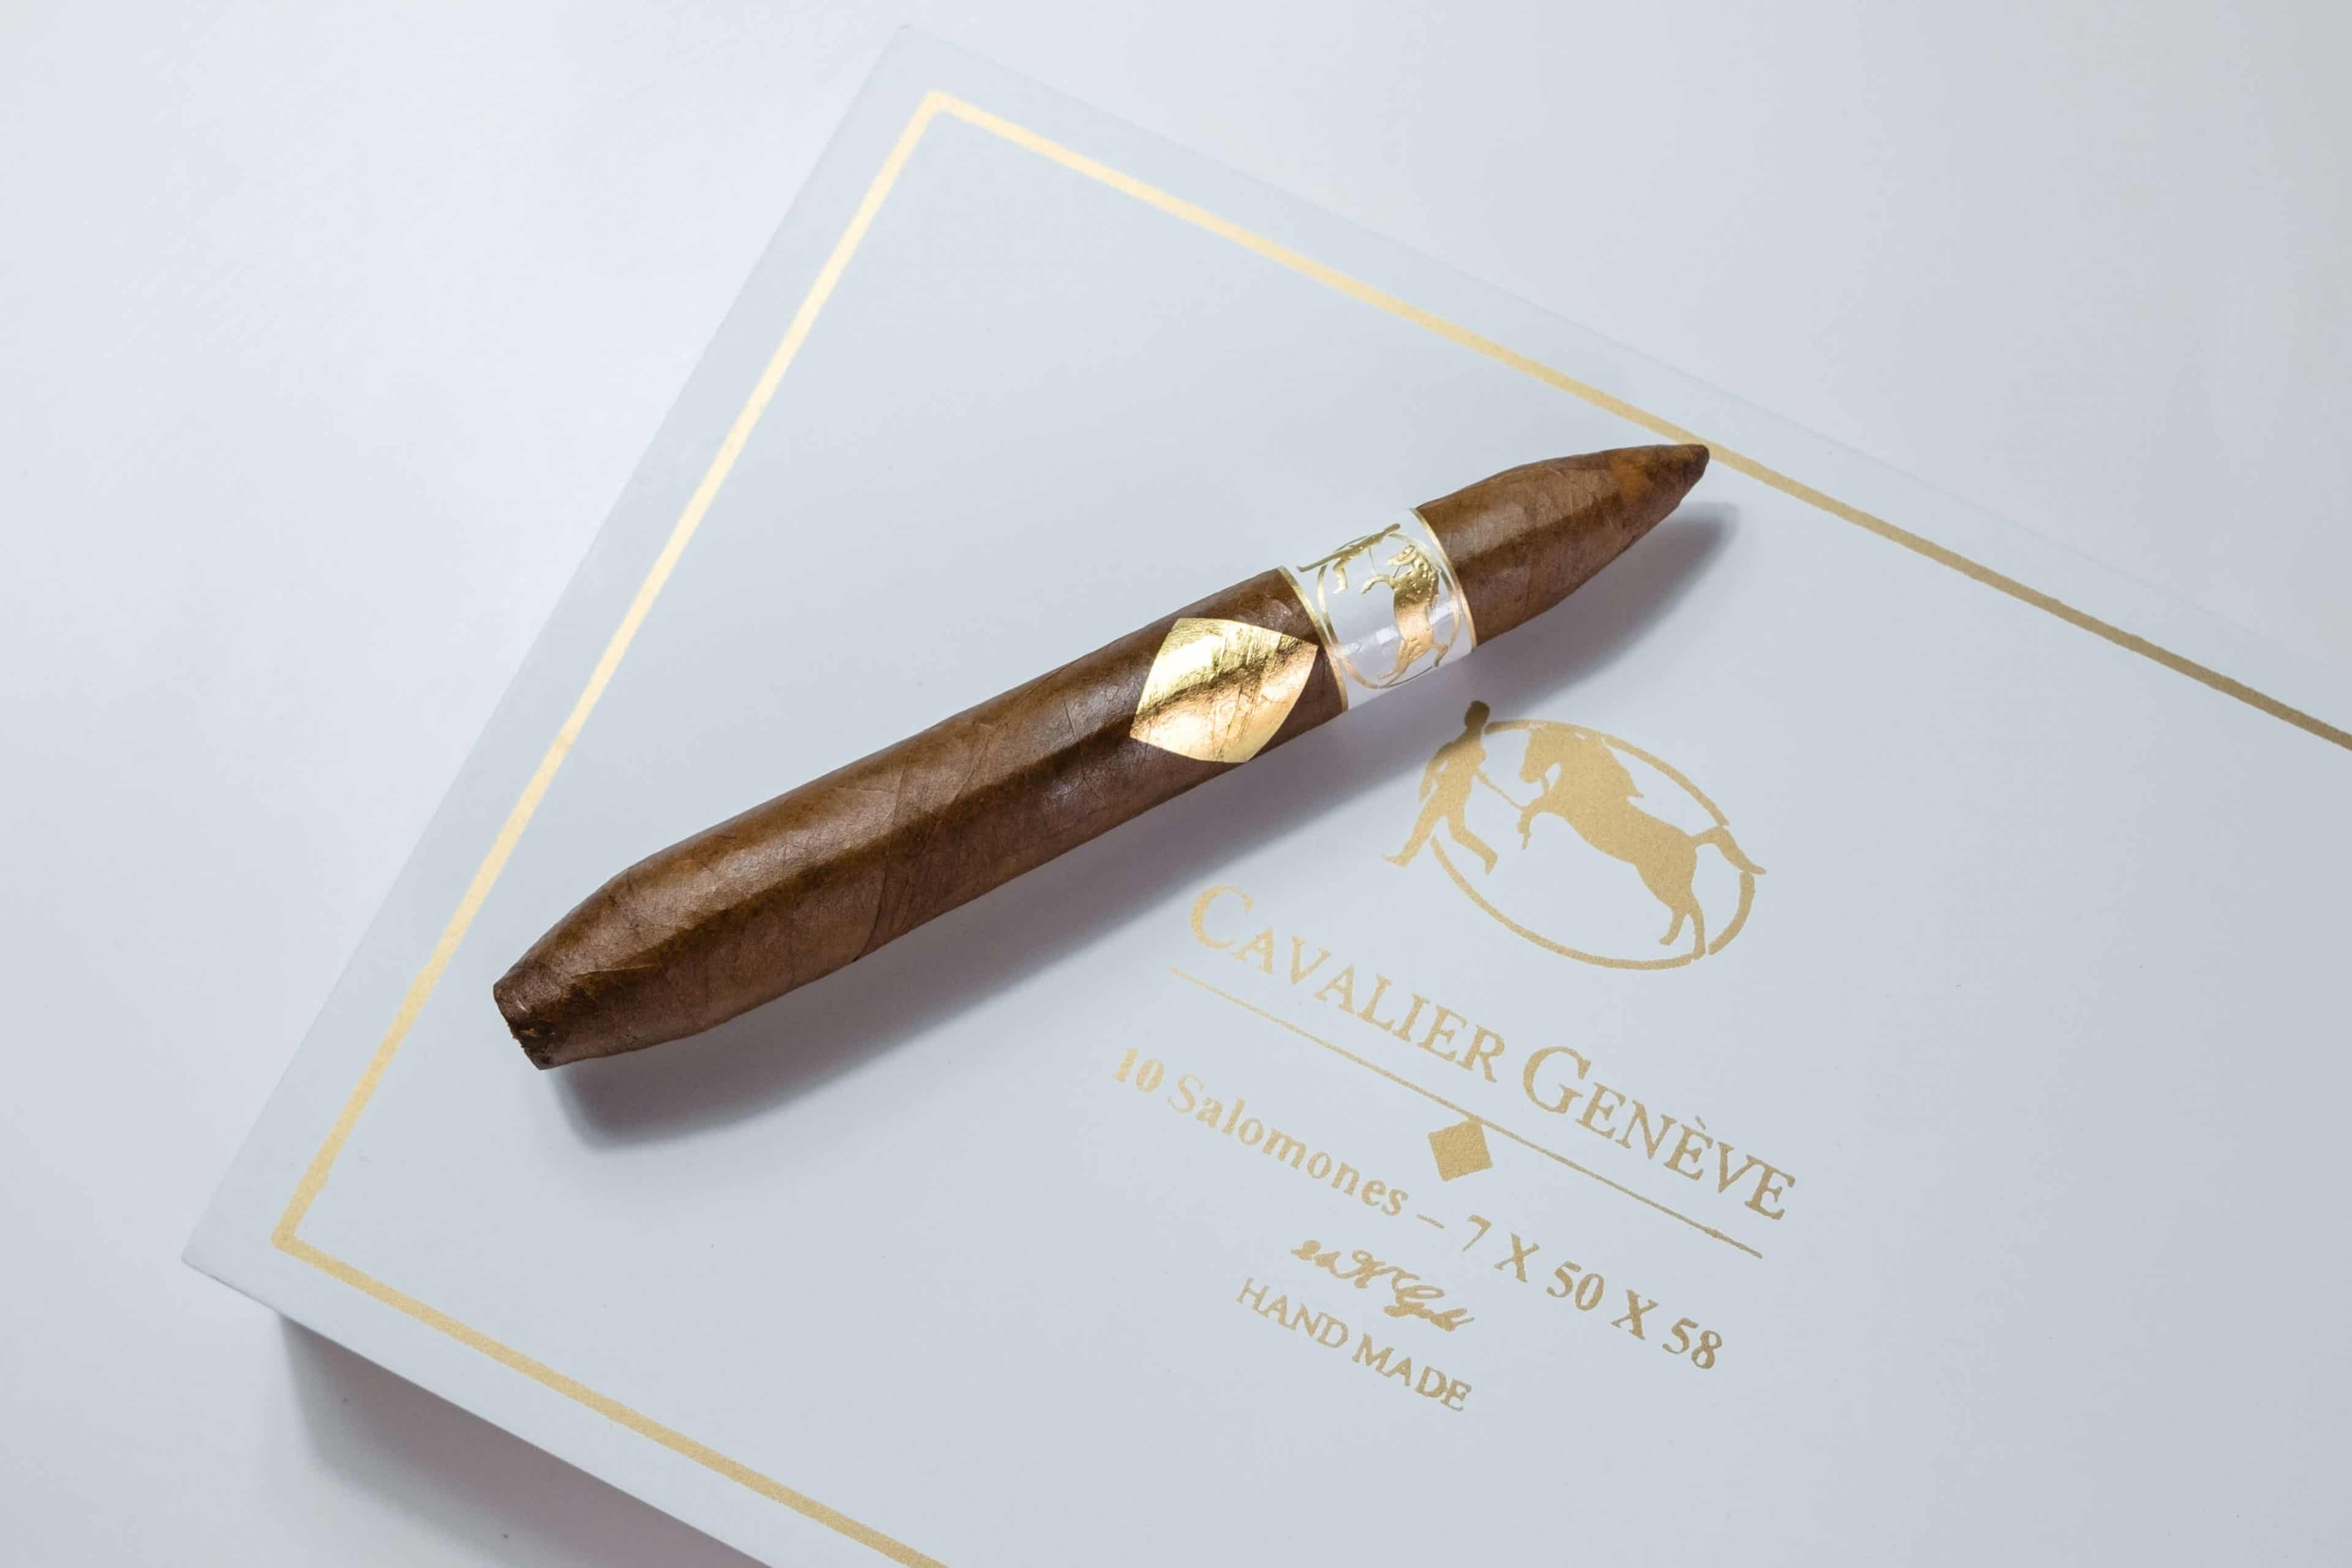 Cigar News: Cavalier Genève Announces Limited Editions for IPCPR 2019